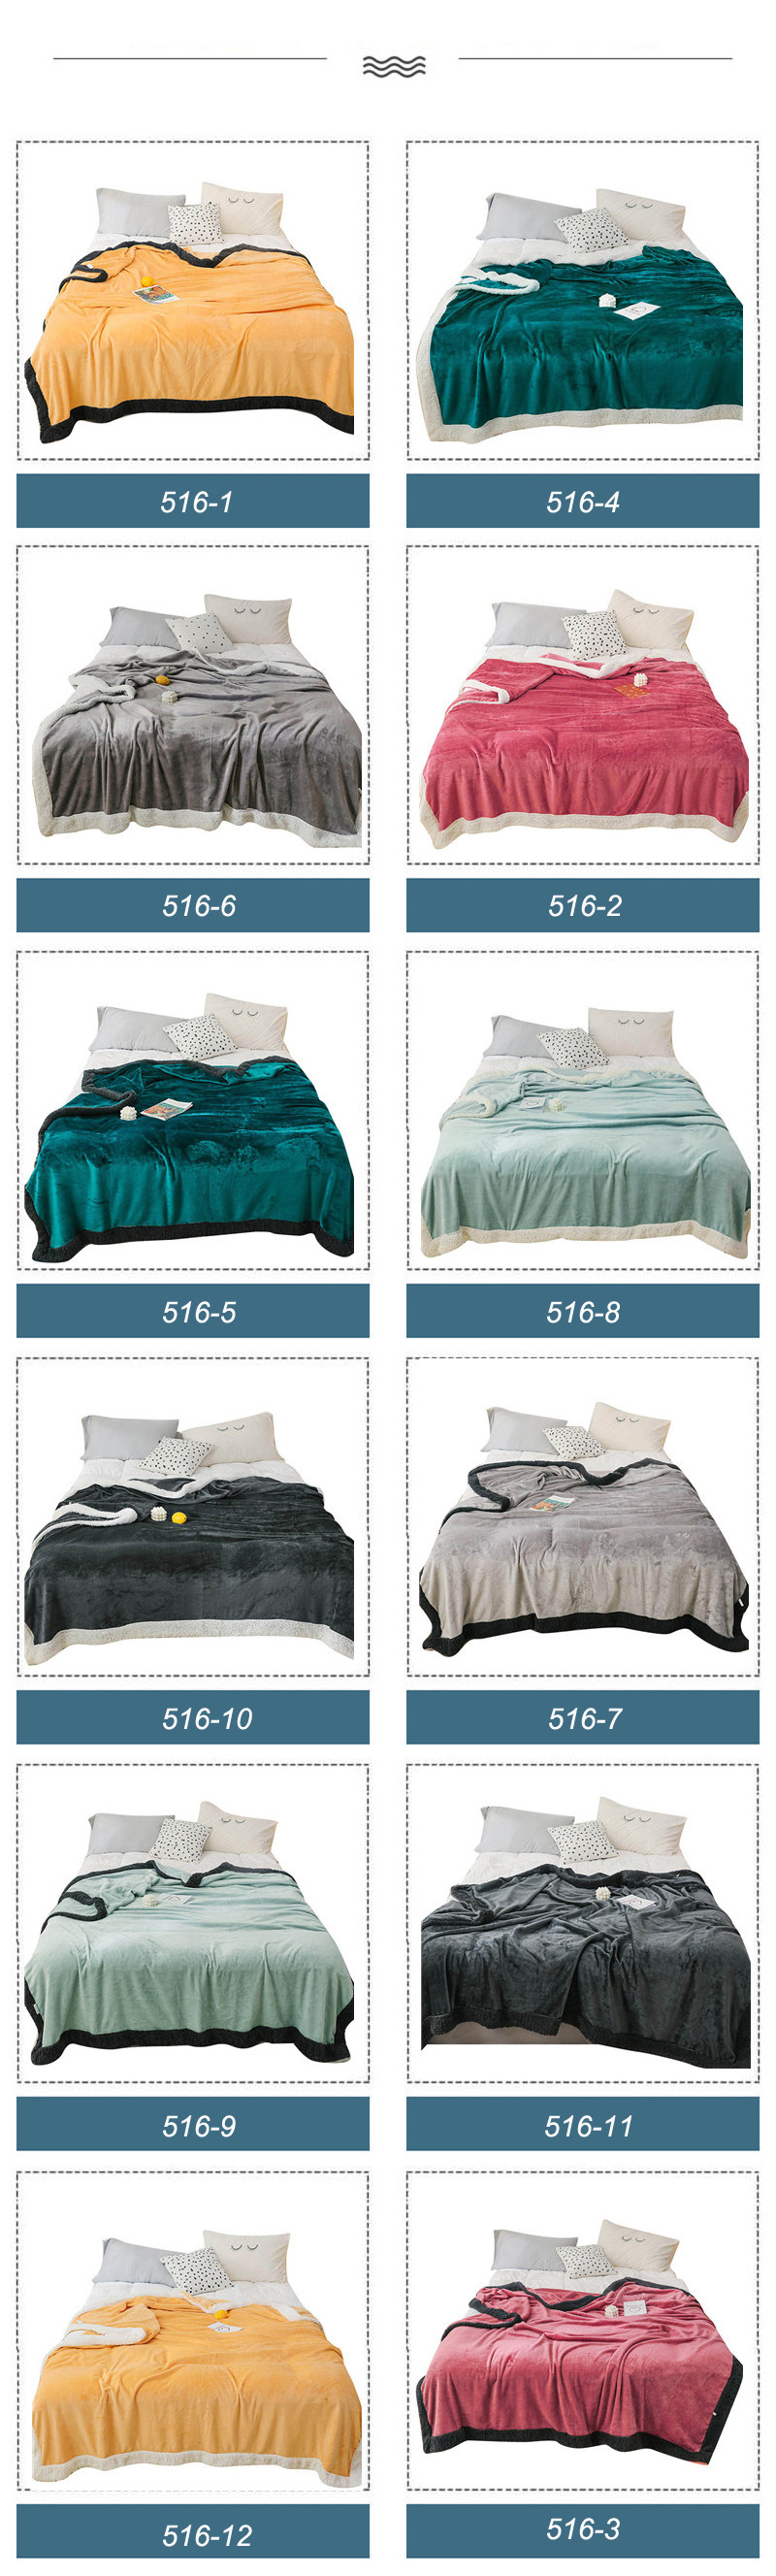 Dual-Sided All Season Polyester Blanket